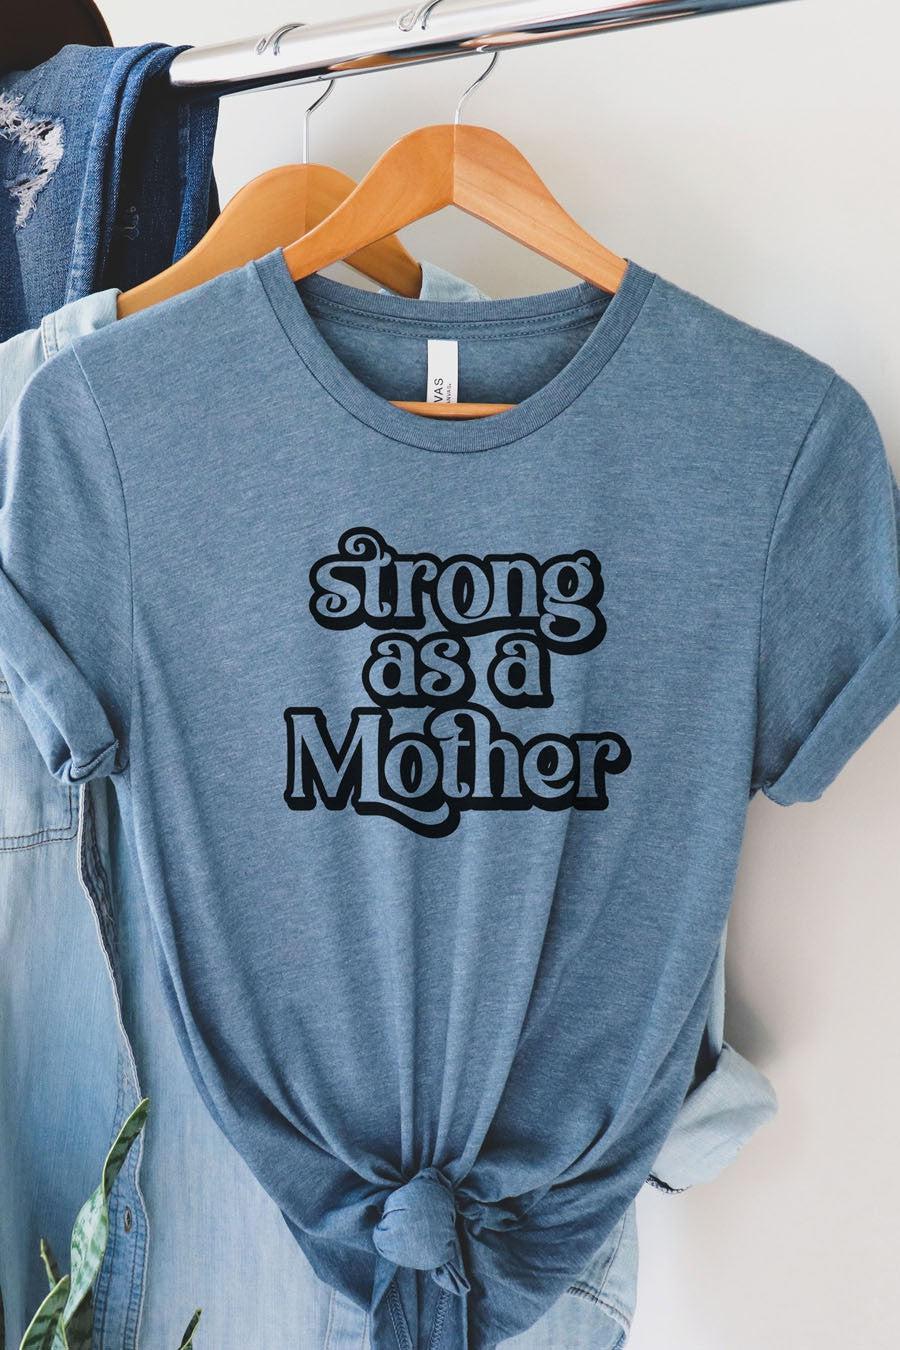 Shop Strong As A Mother Tee-Graphic Tee at Ruby Joy Boutique, a Women's Clothing Store in Pickerington, Ohio